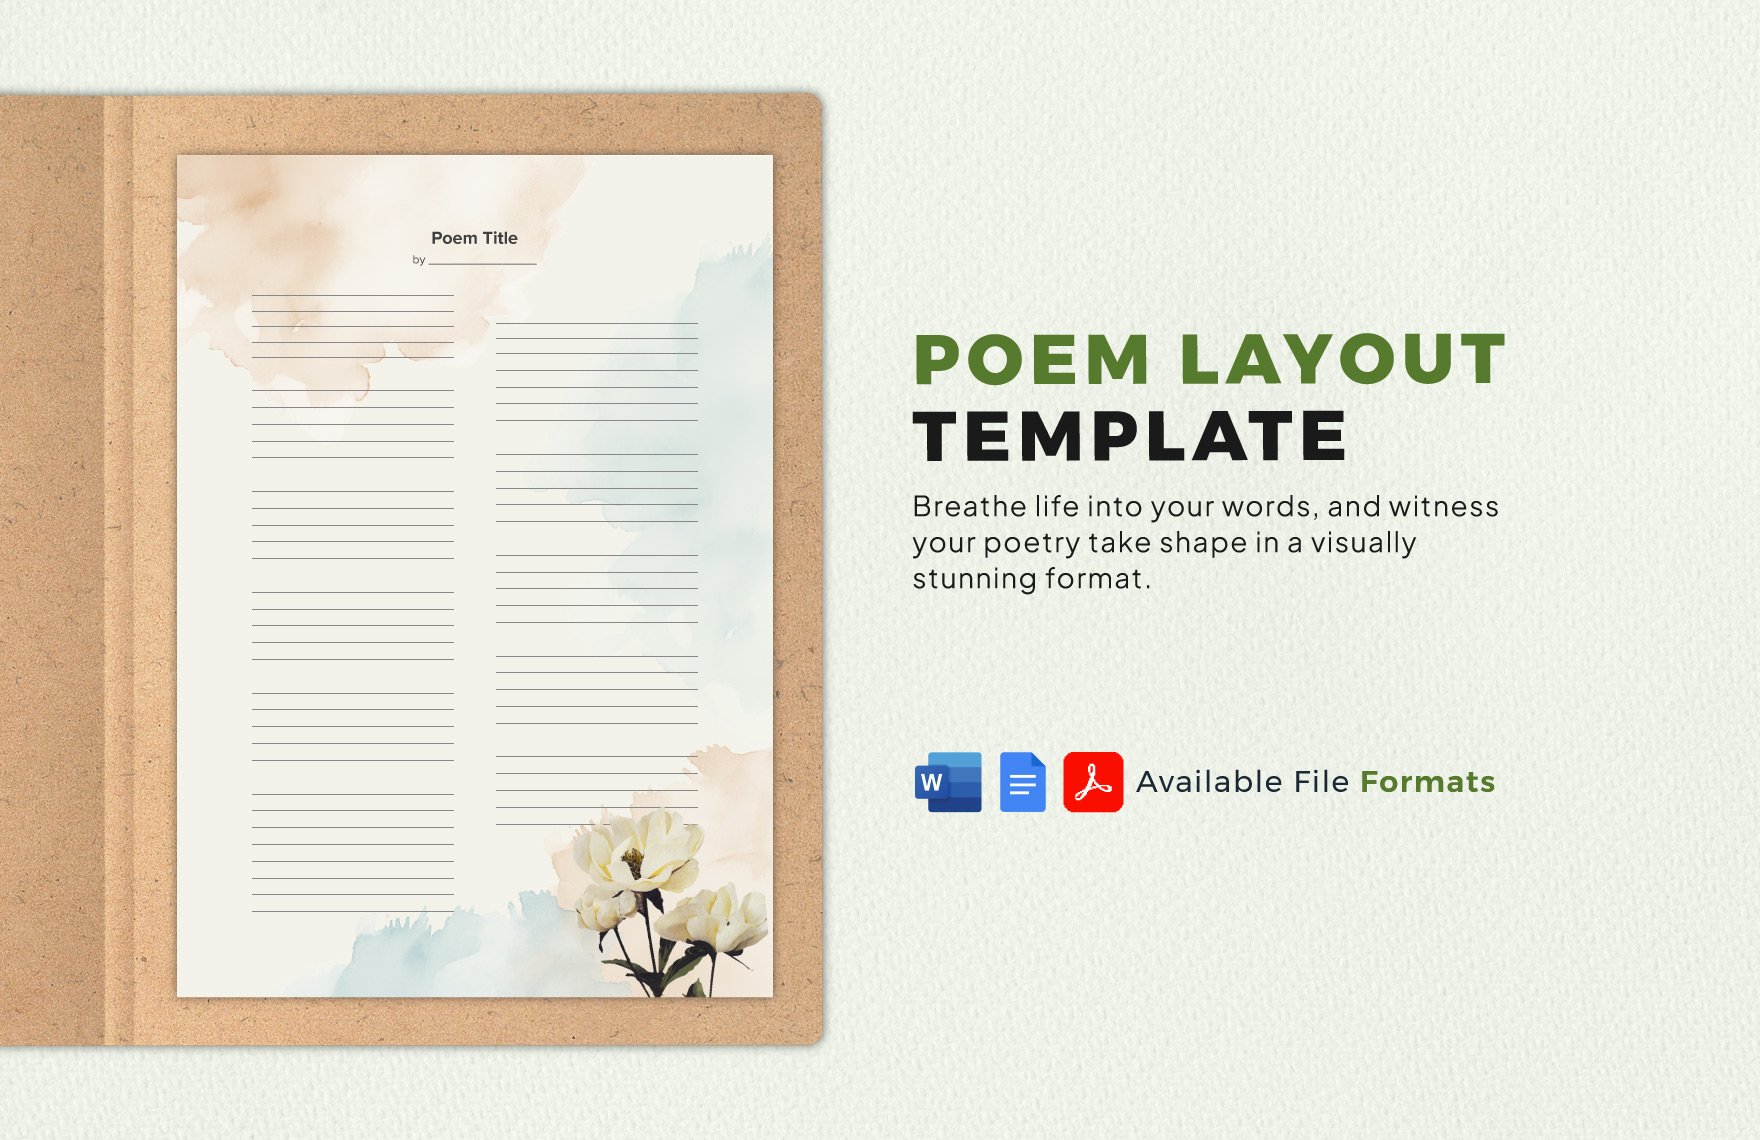 Free Poem Layout Template